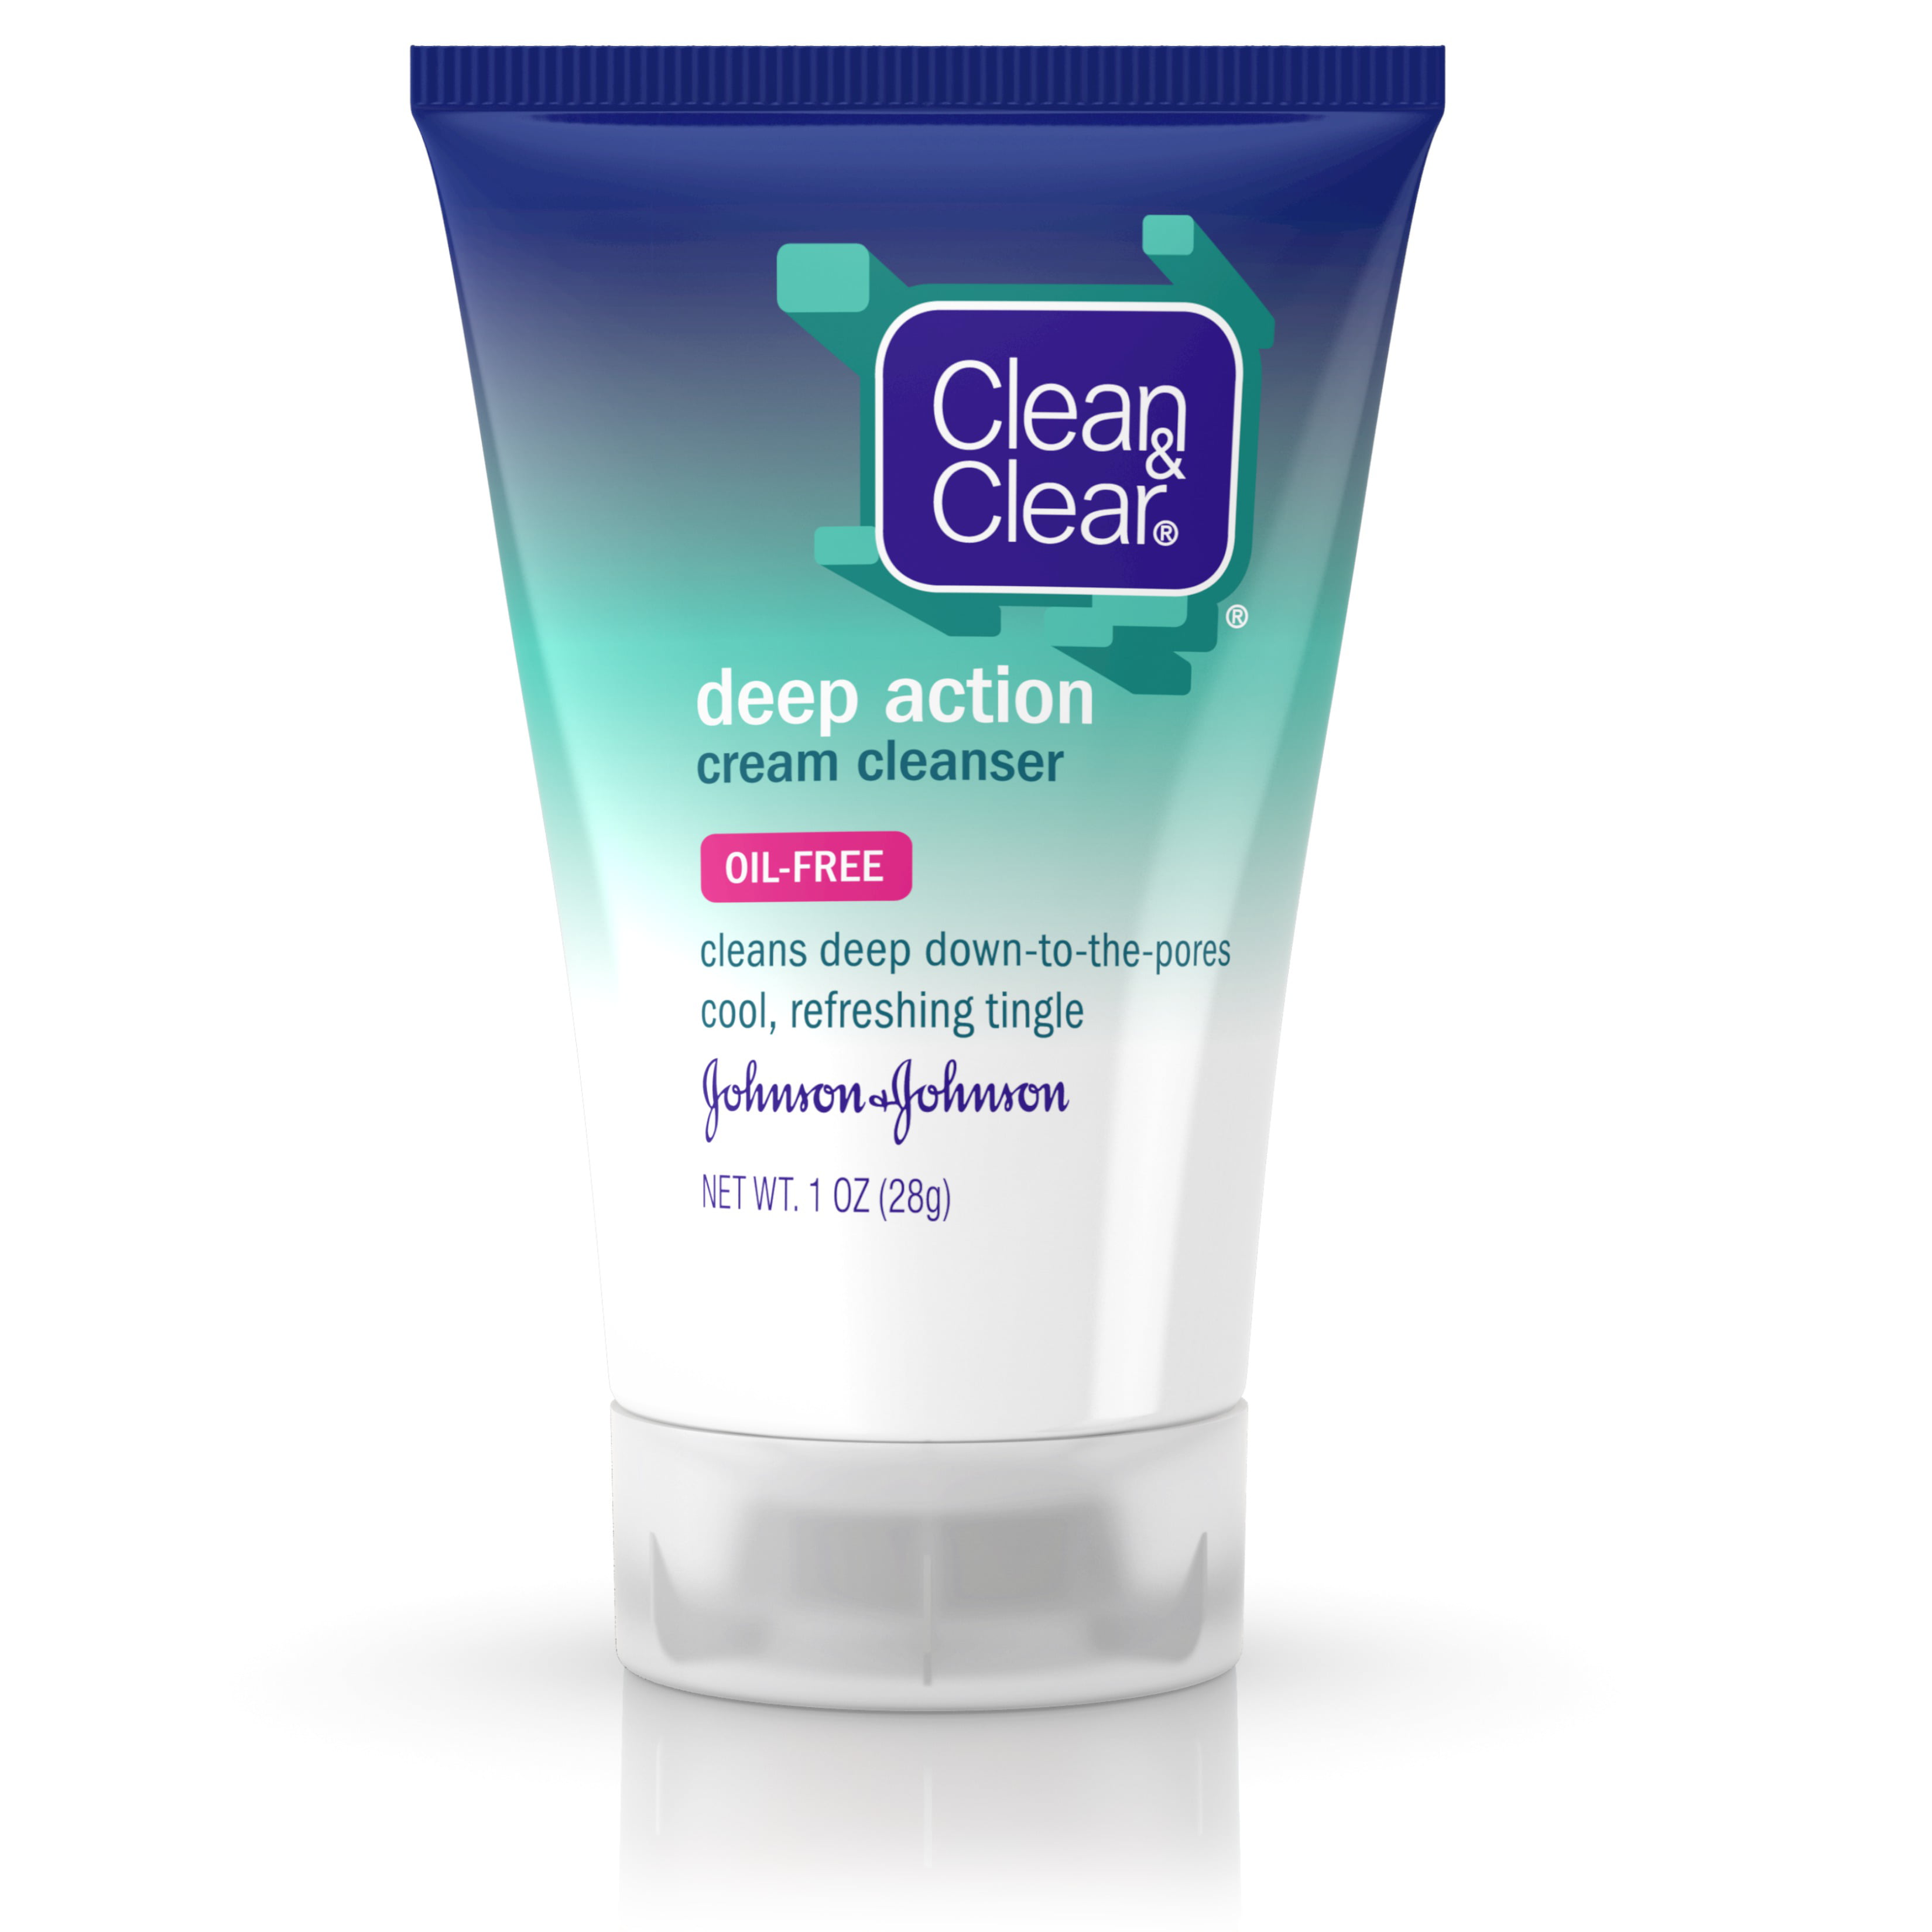 Clean And Clear Cream - Homecare24